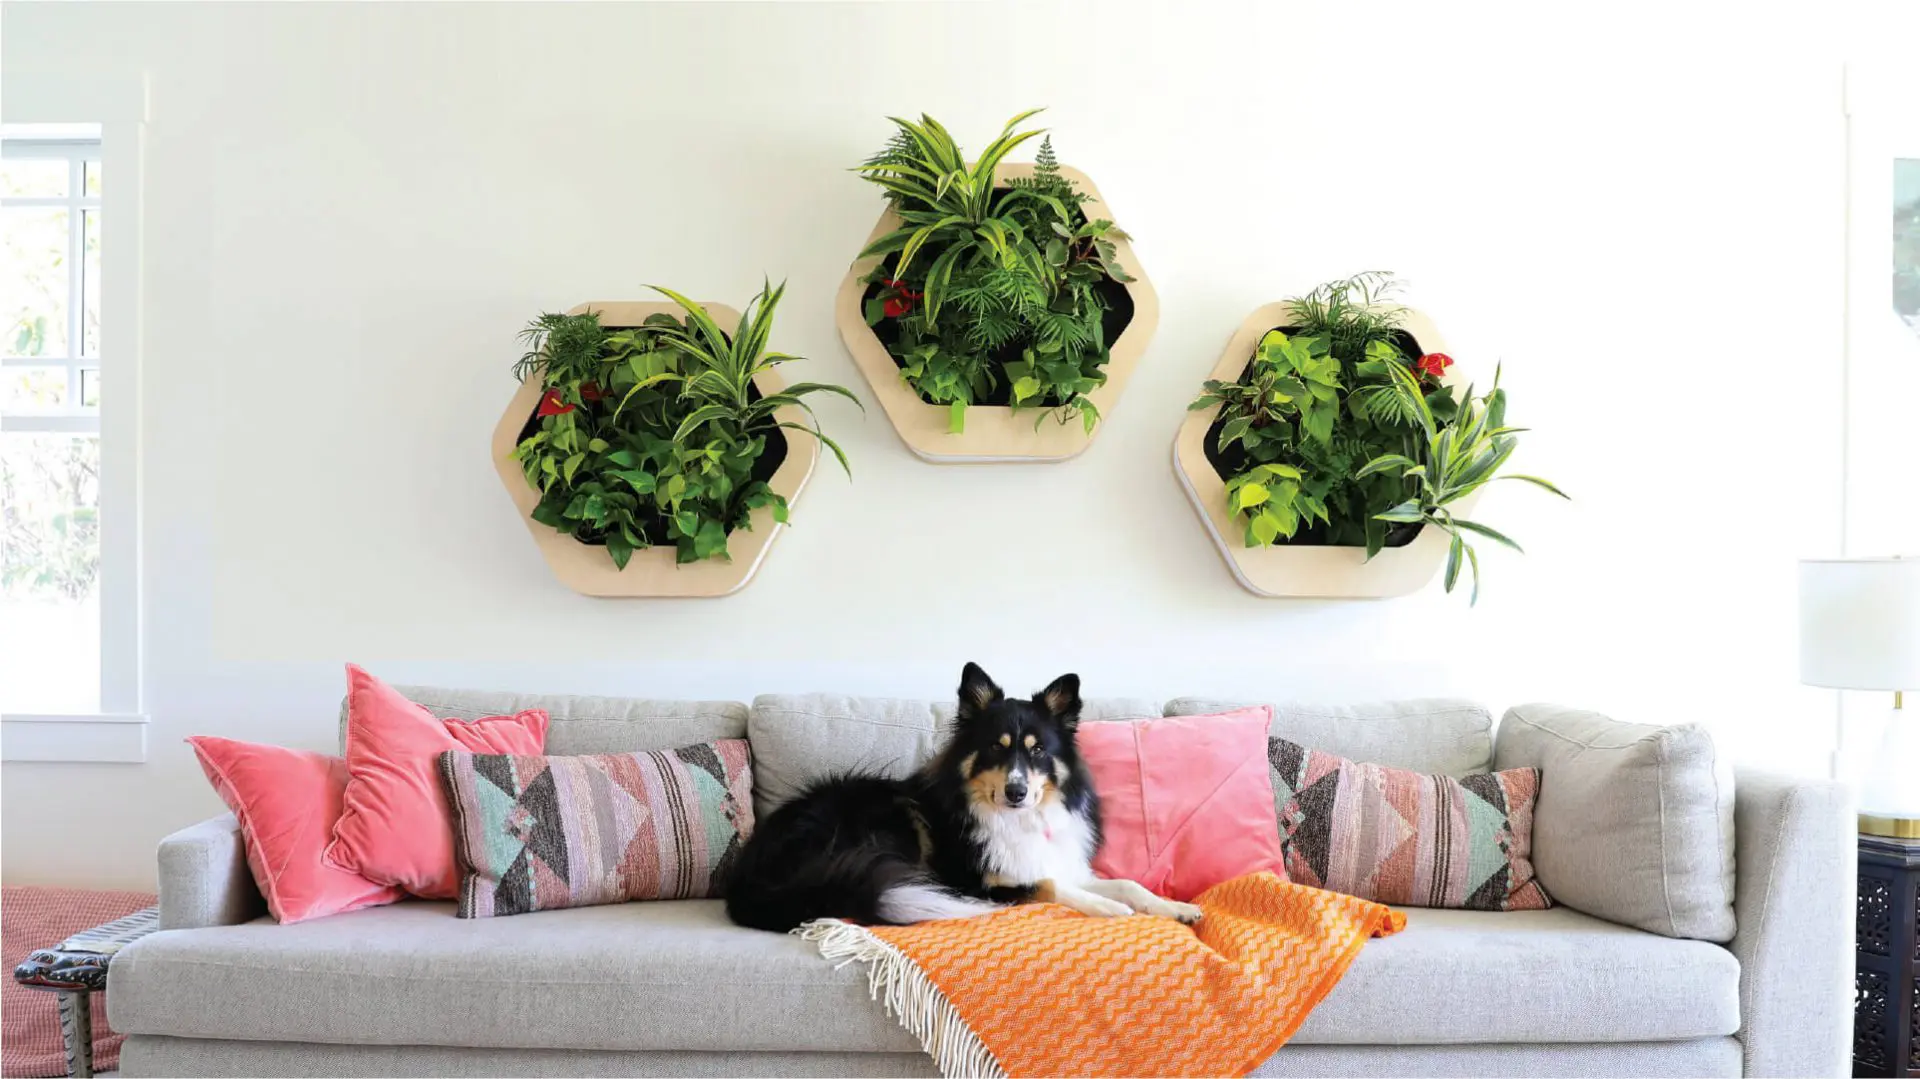 Gromeo panels, bringing some greenery to your walls - ©Habitat Horticulture / Biophilic Design